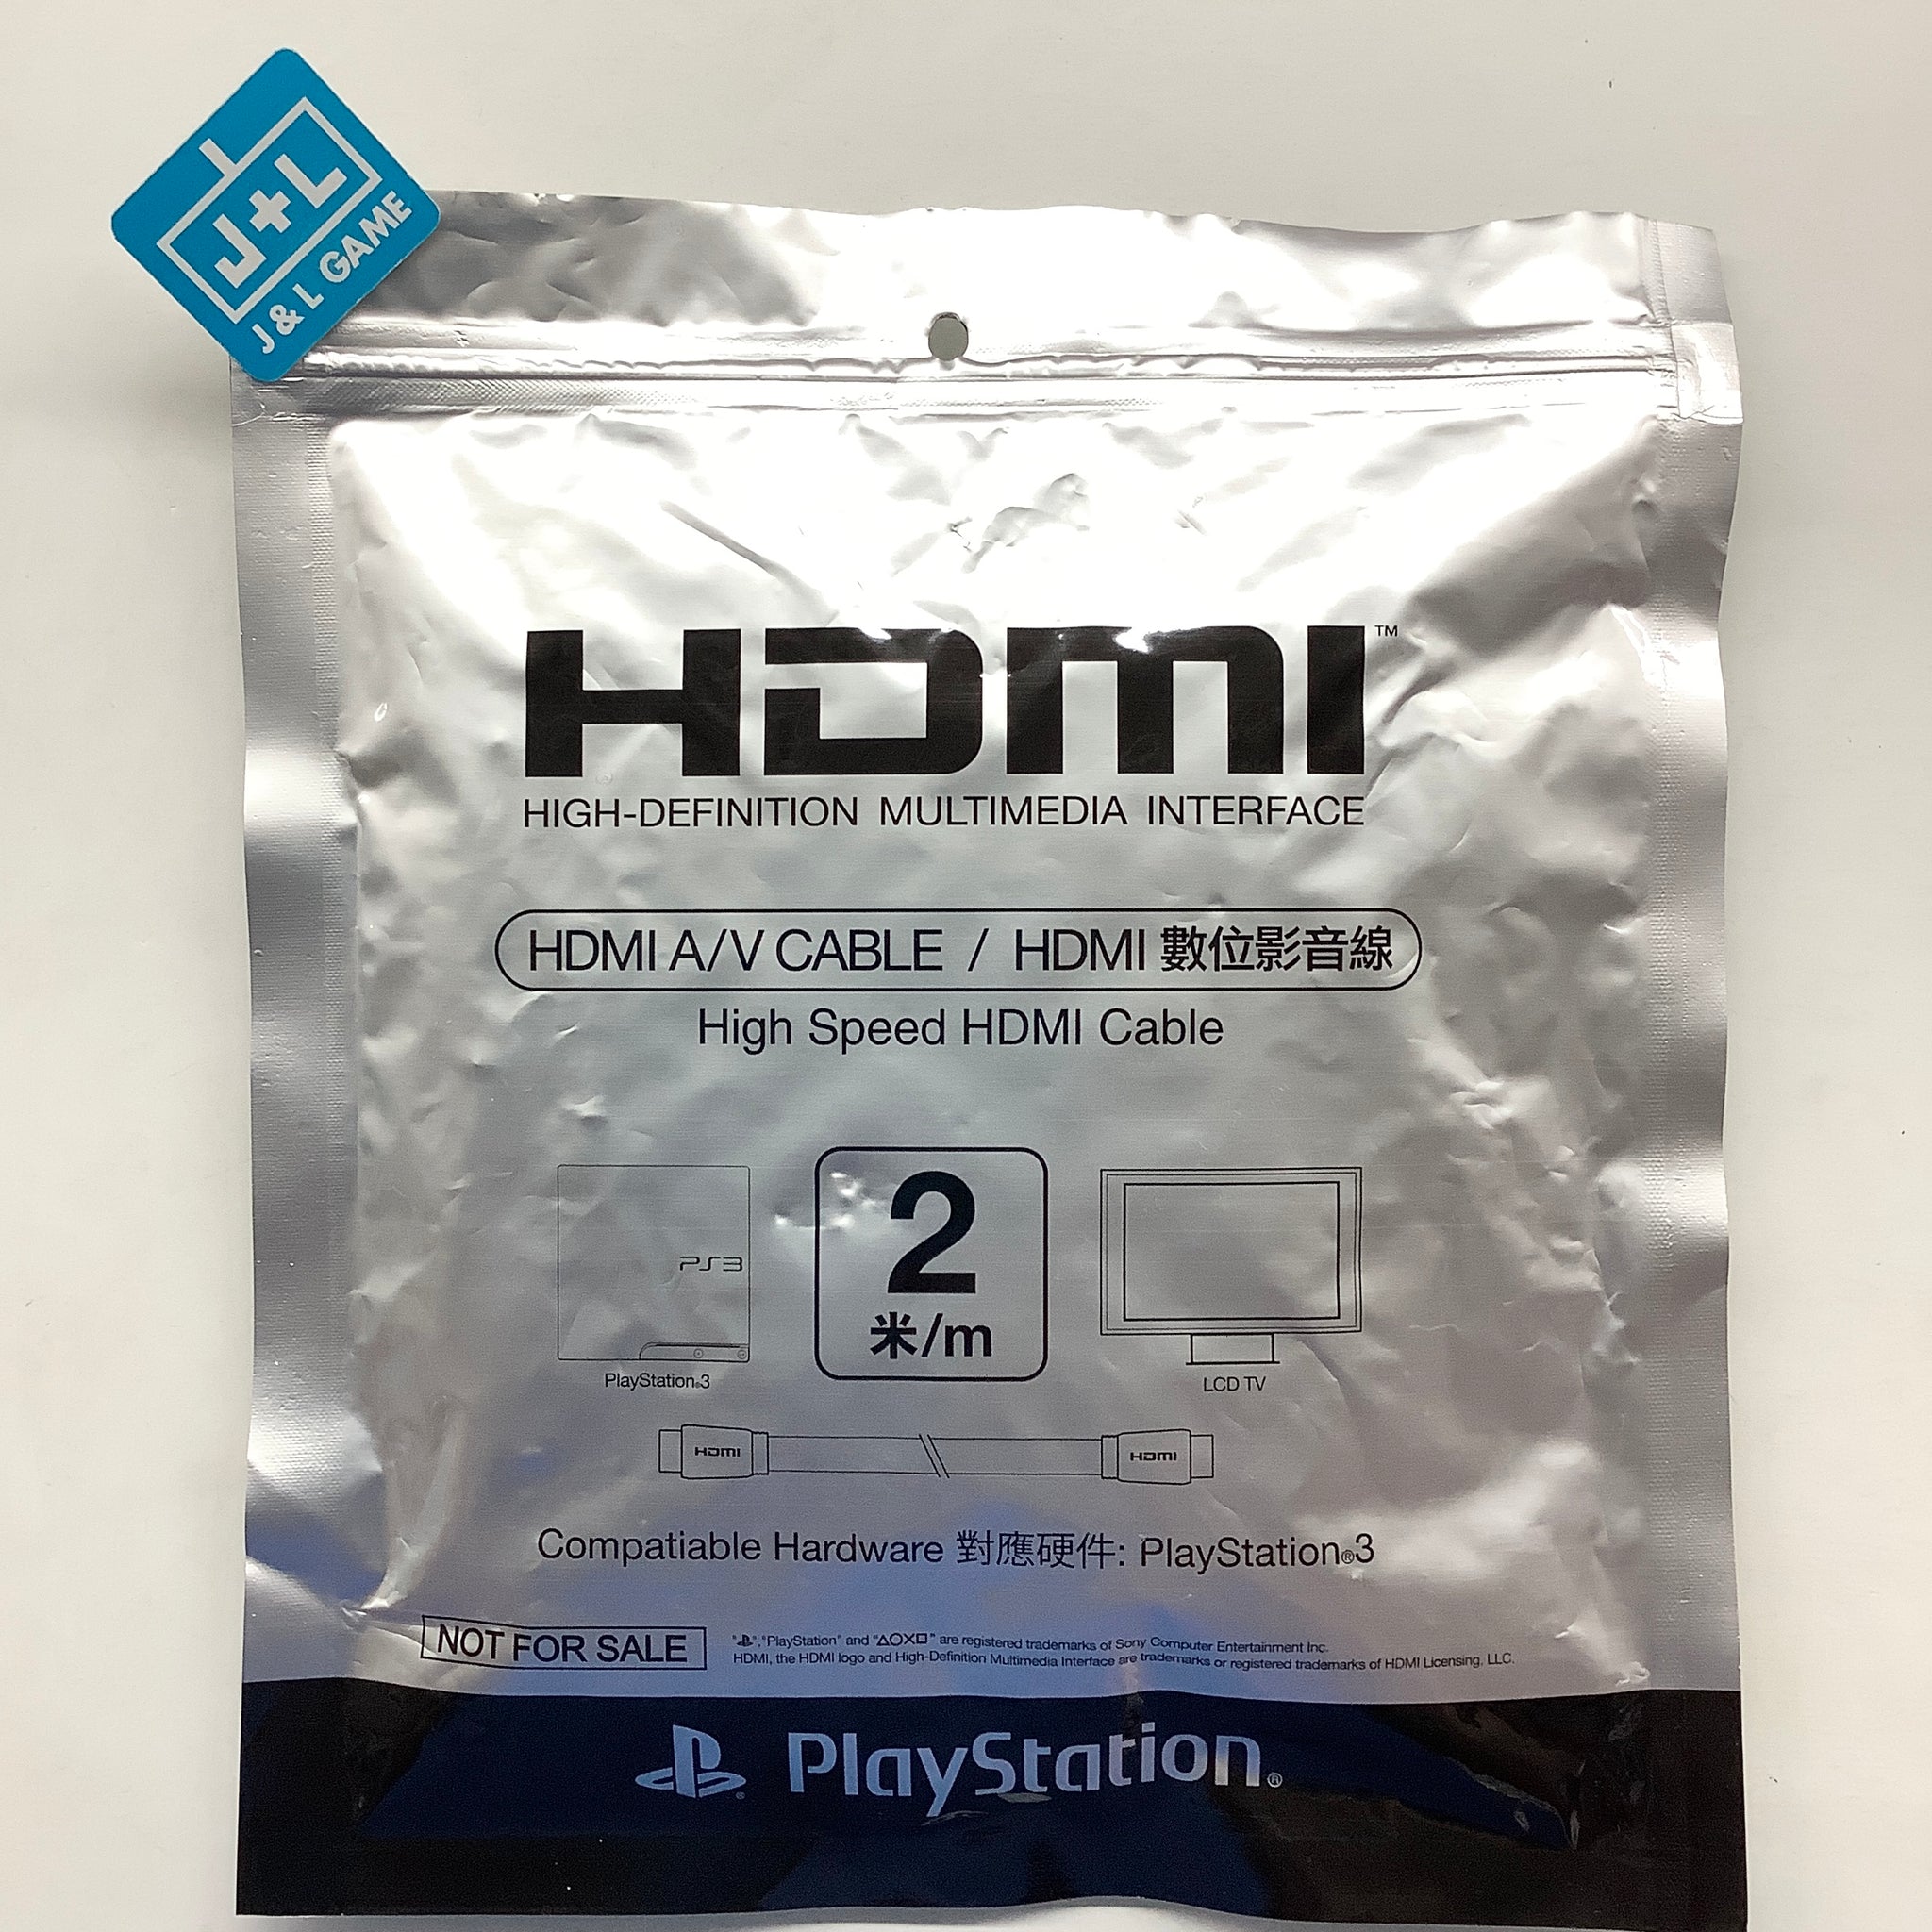 SONY Playstation 3 High Speed HDMI Cable 2M - (PS3)  Playstation 3 ( Japanese Import ) Accessories PlayStation   